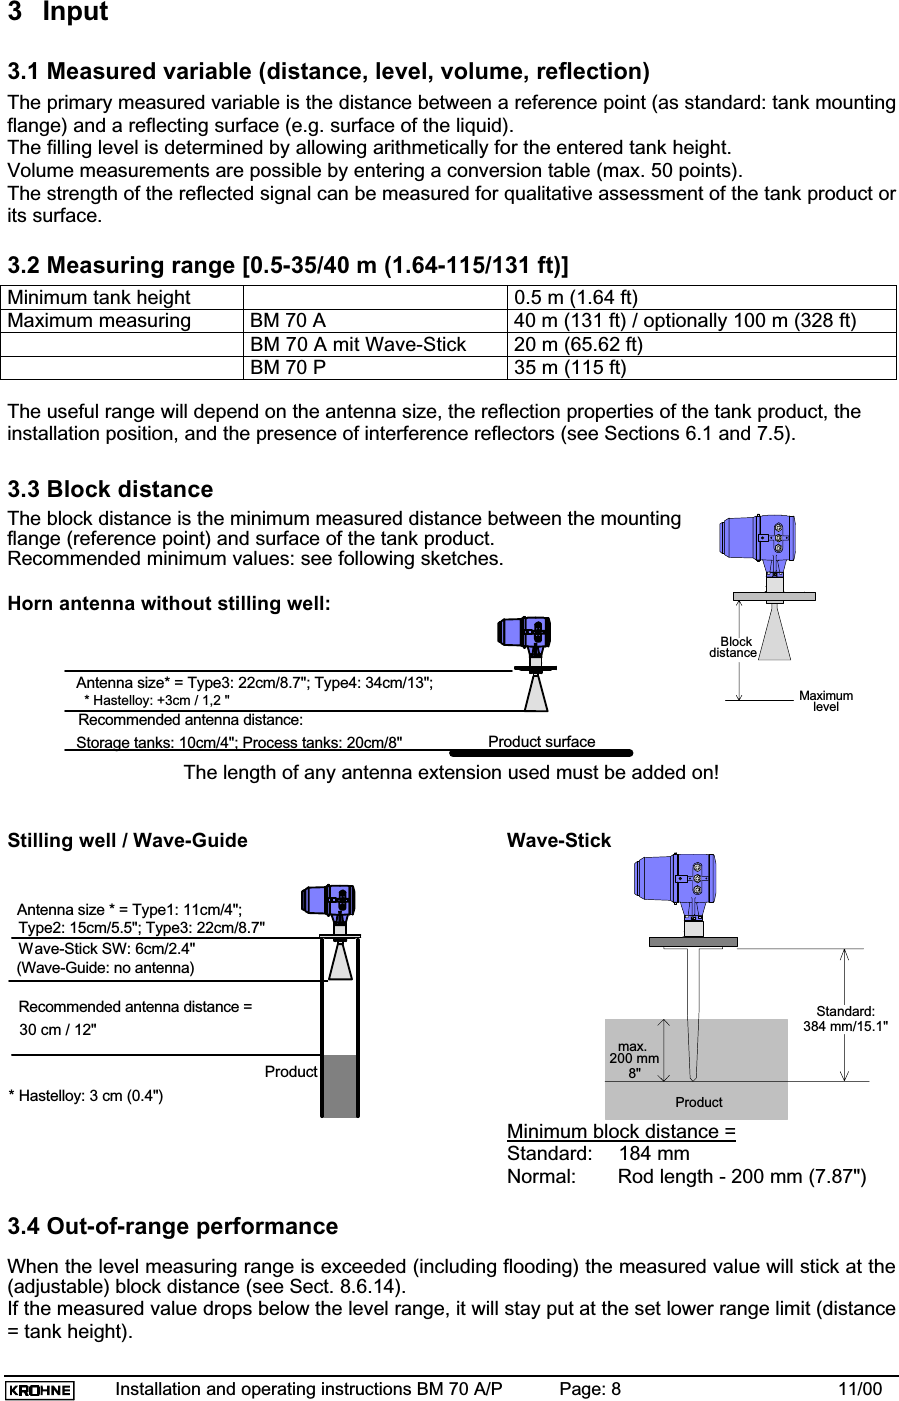 Installation and operating instructions BM 70 A/P Page: 8 11/003 Input3.1 Measured variable (distance, level, volume, reflection)The primary measured variable is the distance between a reference point (as standard: tank mountingflange) and a reflecting surface (e.g. surface of the liquid).The filling level is determined by allowing arithmetically for the entered tank height.Volume measurements are possible by entering a conversion table (max. 50 points).The strength of the reflected signal can be measured for qualitative assessment of the tank product orits surface.3.2 Measuring range [0.5-35/40 m (1.64-115/131 ft)]Minimum tank height 0.5 m (1.64 ft)Maximum measuring BM 70 A 40 m (131 ft) / optionally 100 m (328 ft)BM 70 A mit Wave-Stick 20 m (65.62 ft)BM 70 P 35 m (115 ft)The useful range will depend on the antenna size, the reflection properties of the tank product, theinstallation position, and the presence of interference reflectors (see Sections 6.1 and 7.5).3.3 Block distanceThe block distance is the minimum measured distance between the mountingflange (reference point) and surface of the tank product.Recommended minimum values: see following sketches.Horn antenna without stilling well:Product surfaceStorage tanks: 10cm/4&quot;; Process tanks: 20cm/8&quot;Antenna size* = Type3: 22cm/8.7&quot;; Type4: 34cm/13&quot;;  * Hastelloy: +3cm / 1,2 &quot;Recommended antenna distance:The length of any antenna extension used must be added on!Stilling well / Wave-Guide Wave-StickProductAntenna size * = Type1: 11cm/4&quot;;Type2: 15cm/5.5&quot;; Type3: 22cm/8.7&quot;Recommended antenna distance =30 cm / 12&quot;(Wave-Guide: no antenna)* Hastelloy: 3 cm (0.4&quot;)Wave-Stick SW: 6cm/2.4&quot;384 mm/15.1&quot;Productmax.200 mmStandard:8&quot;Minimum block distance =Standard: 184 mmNormal: Rod length - 200 mm (7.87&quot;)3.4 Out-of-range performanceWhen the level measuring range is exceeded (including flooding) the measured value will stick at the(adjustable) block distance (see Sect. 8.6.14).If the measured value drops below the level range, it will stay put at the set lower range limit (distance= tank height).MaximumlevelBlockdistance